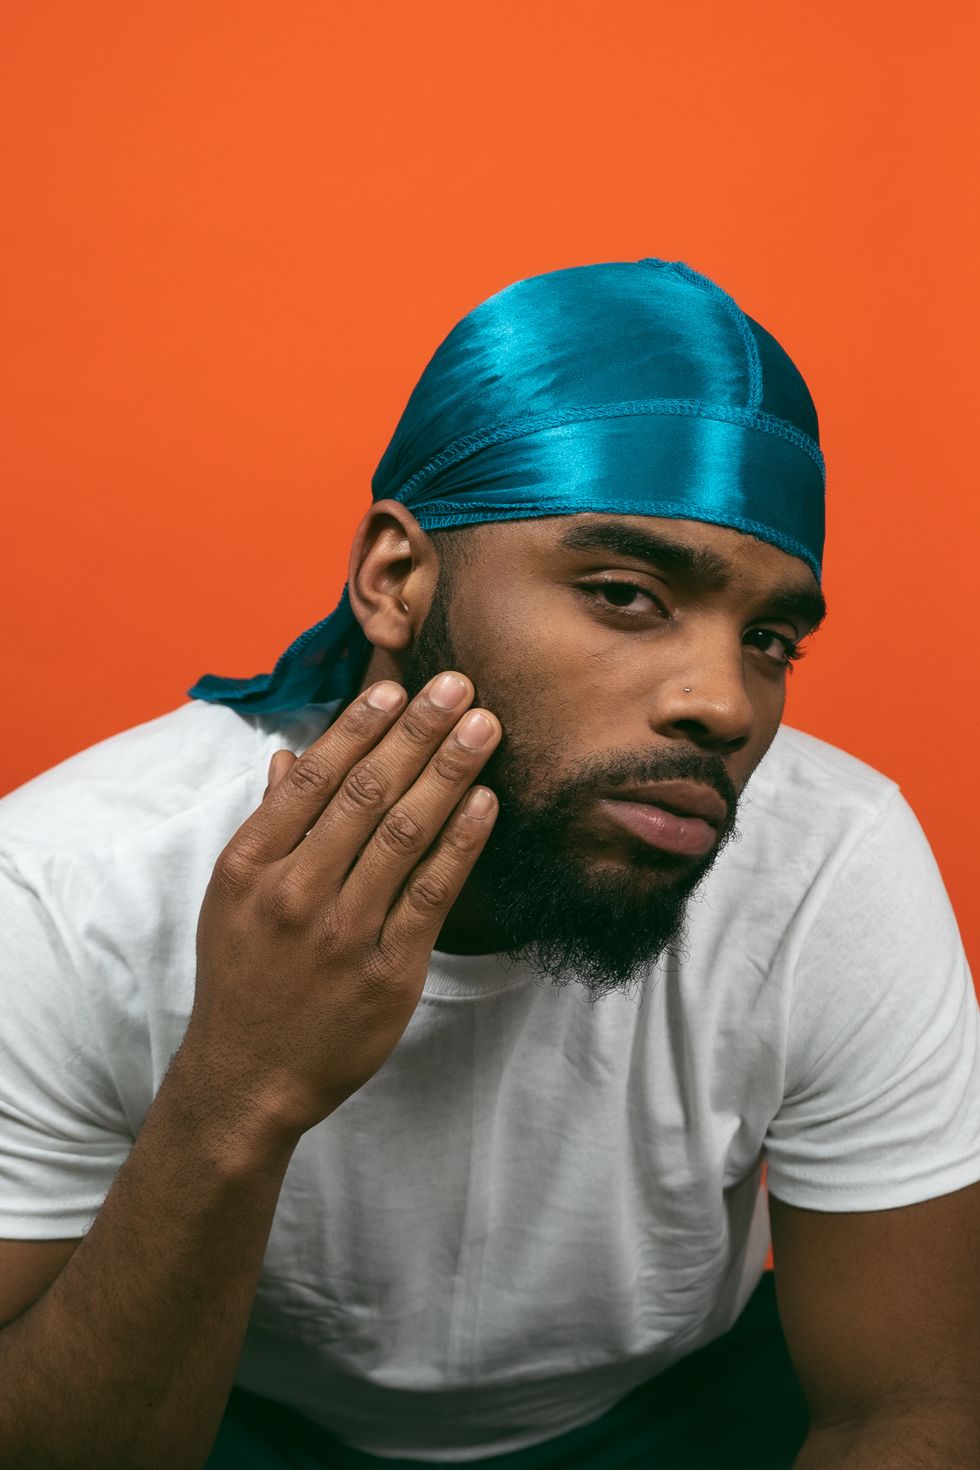 Annie Bercy's Portraits Tackle Perceptions Of Black Men In Durags